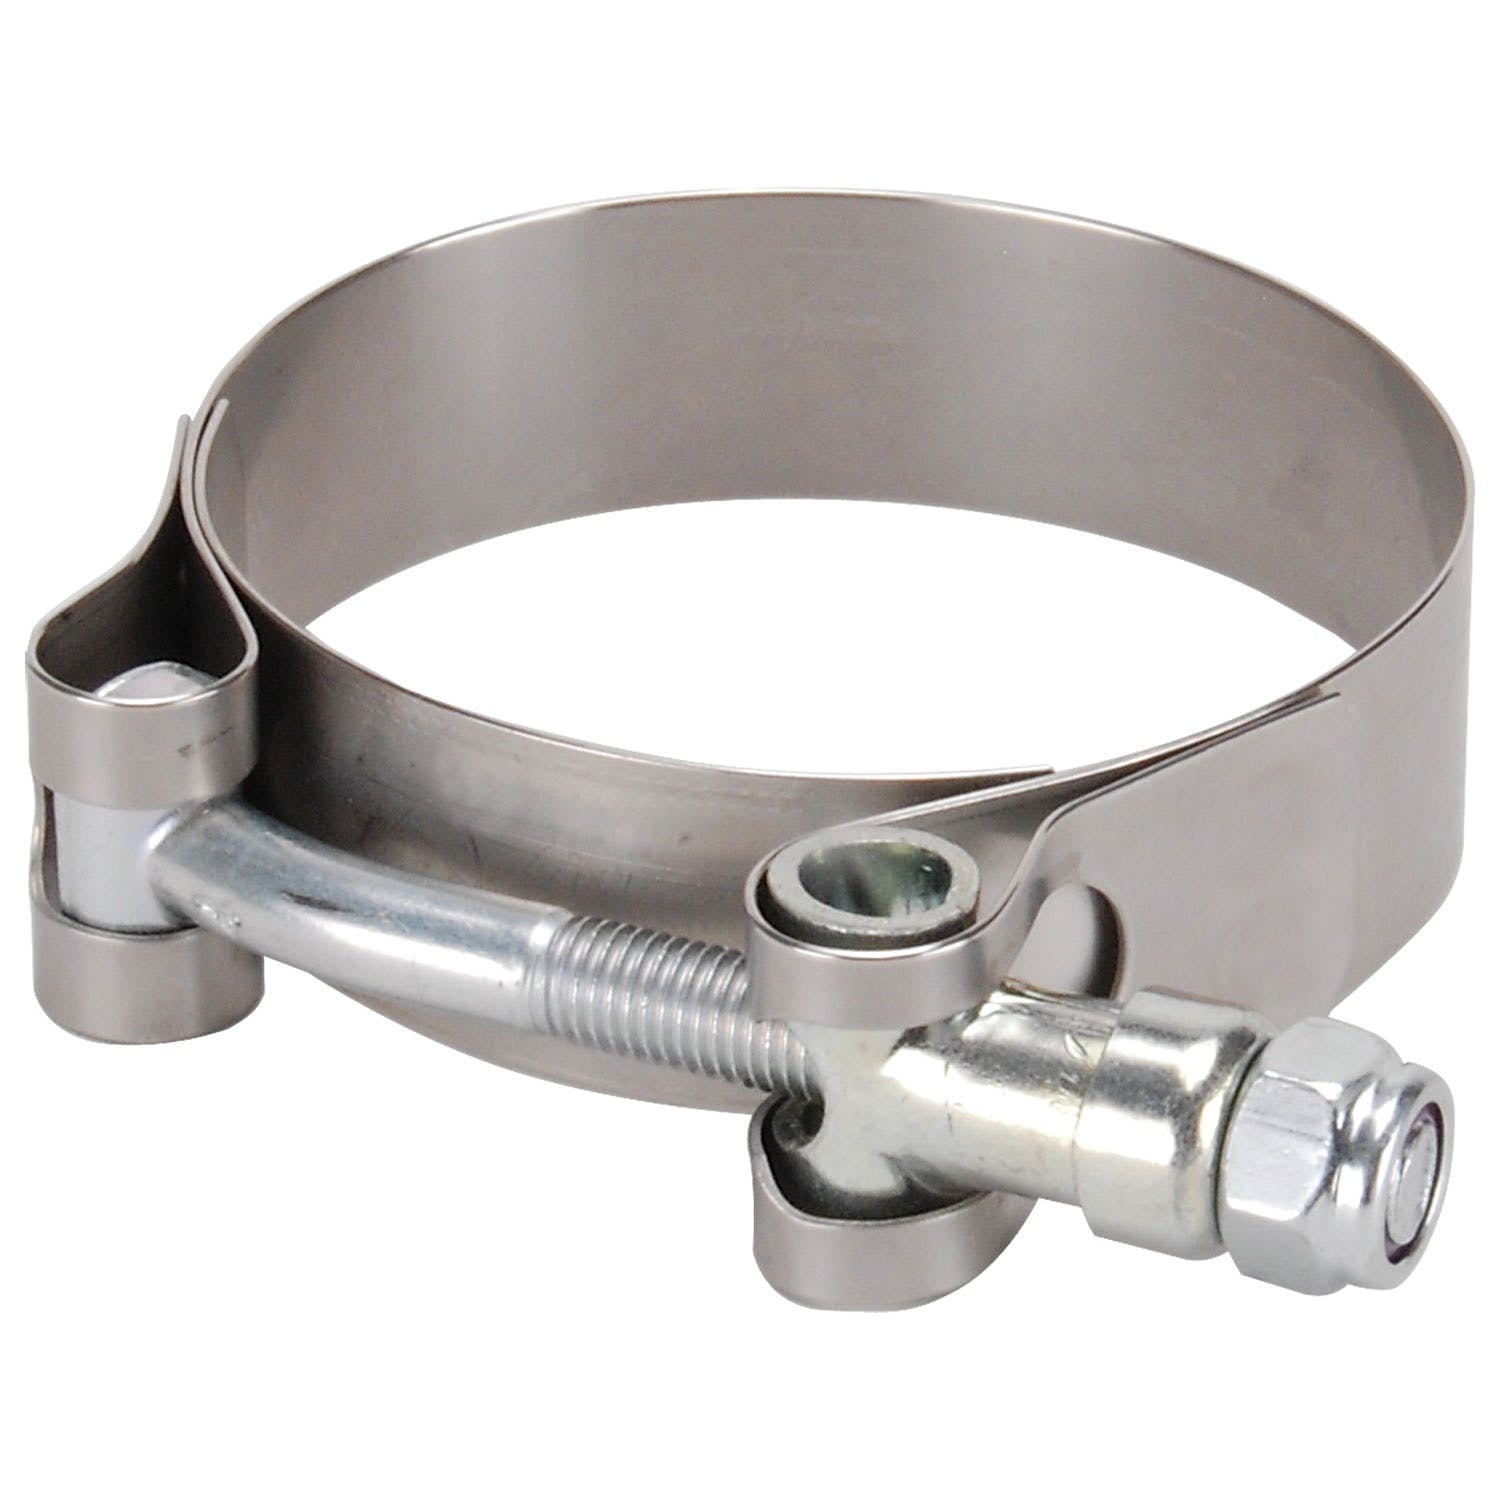 Design Engineering, Inc. 10214 Wide Band Clamp, 2.25 to 2.56 1 per pack